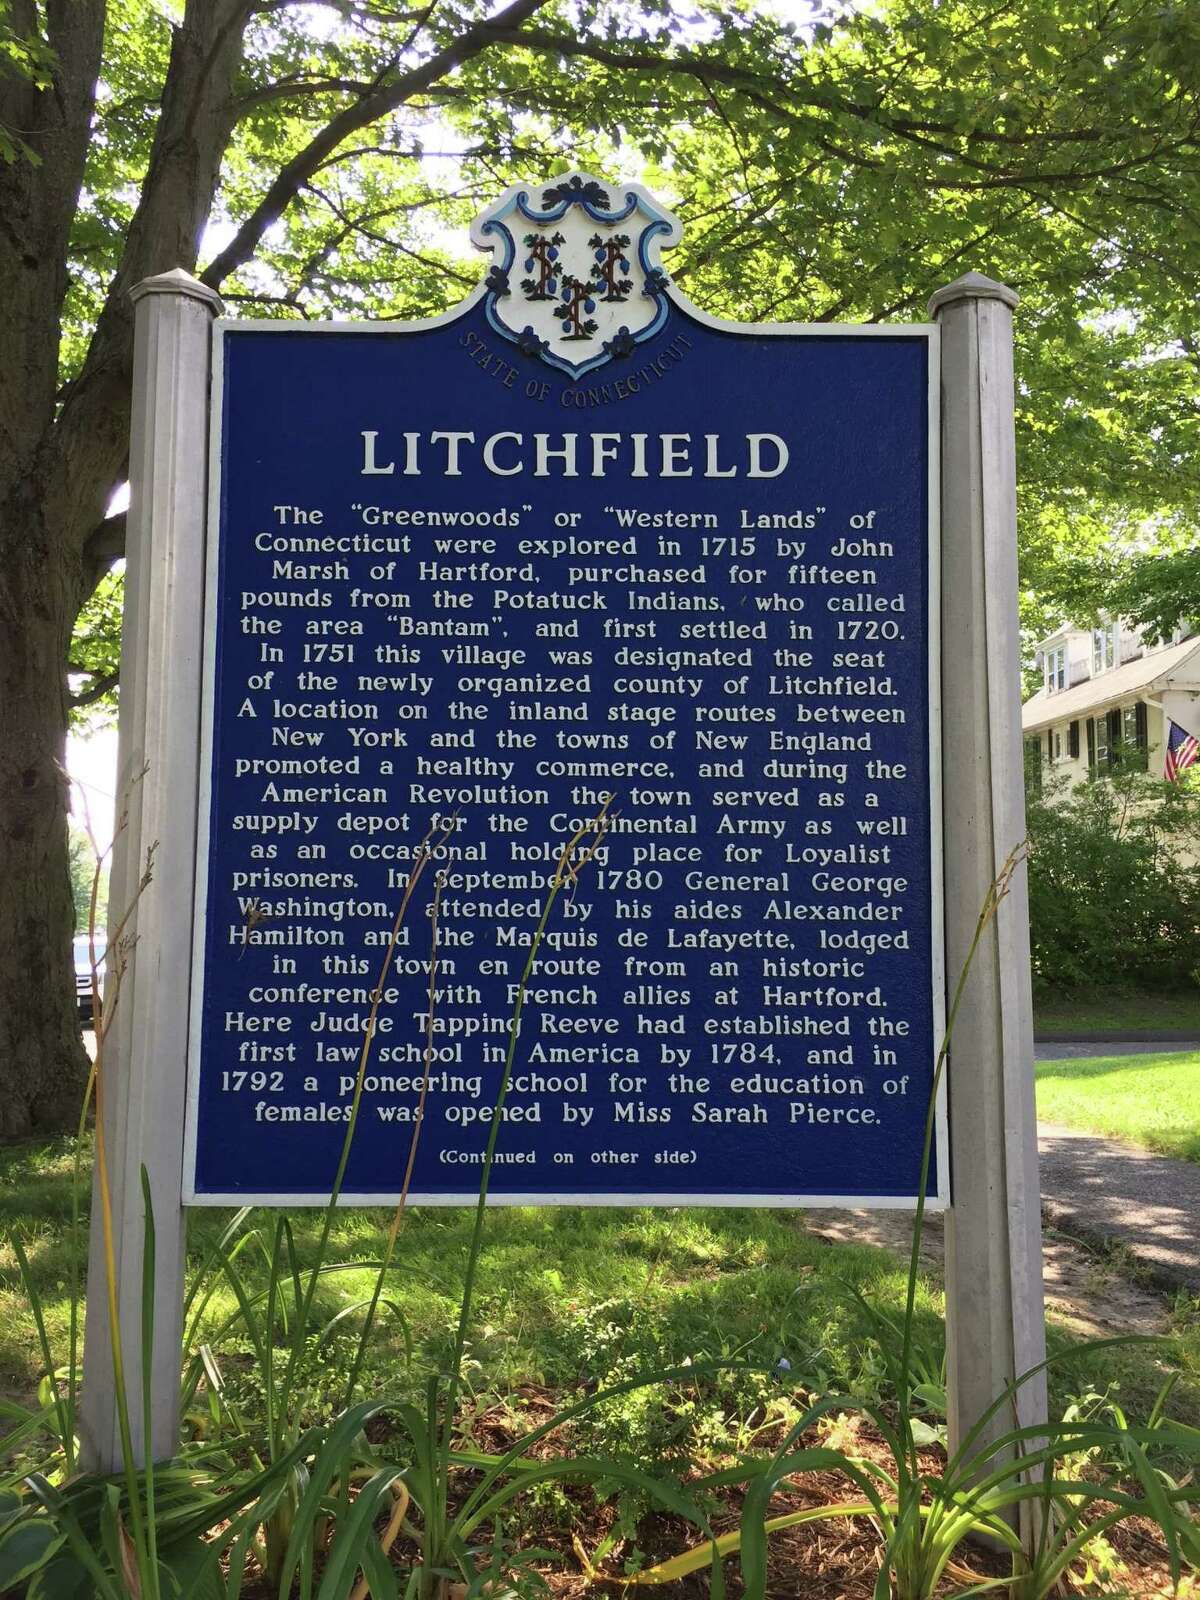 Visit Litchfield CT, an initiative of the Litchfield Economic Development Commission, has launched an Instagram Live series of conversations with leaders of local attractions.